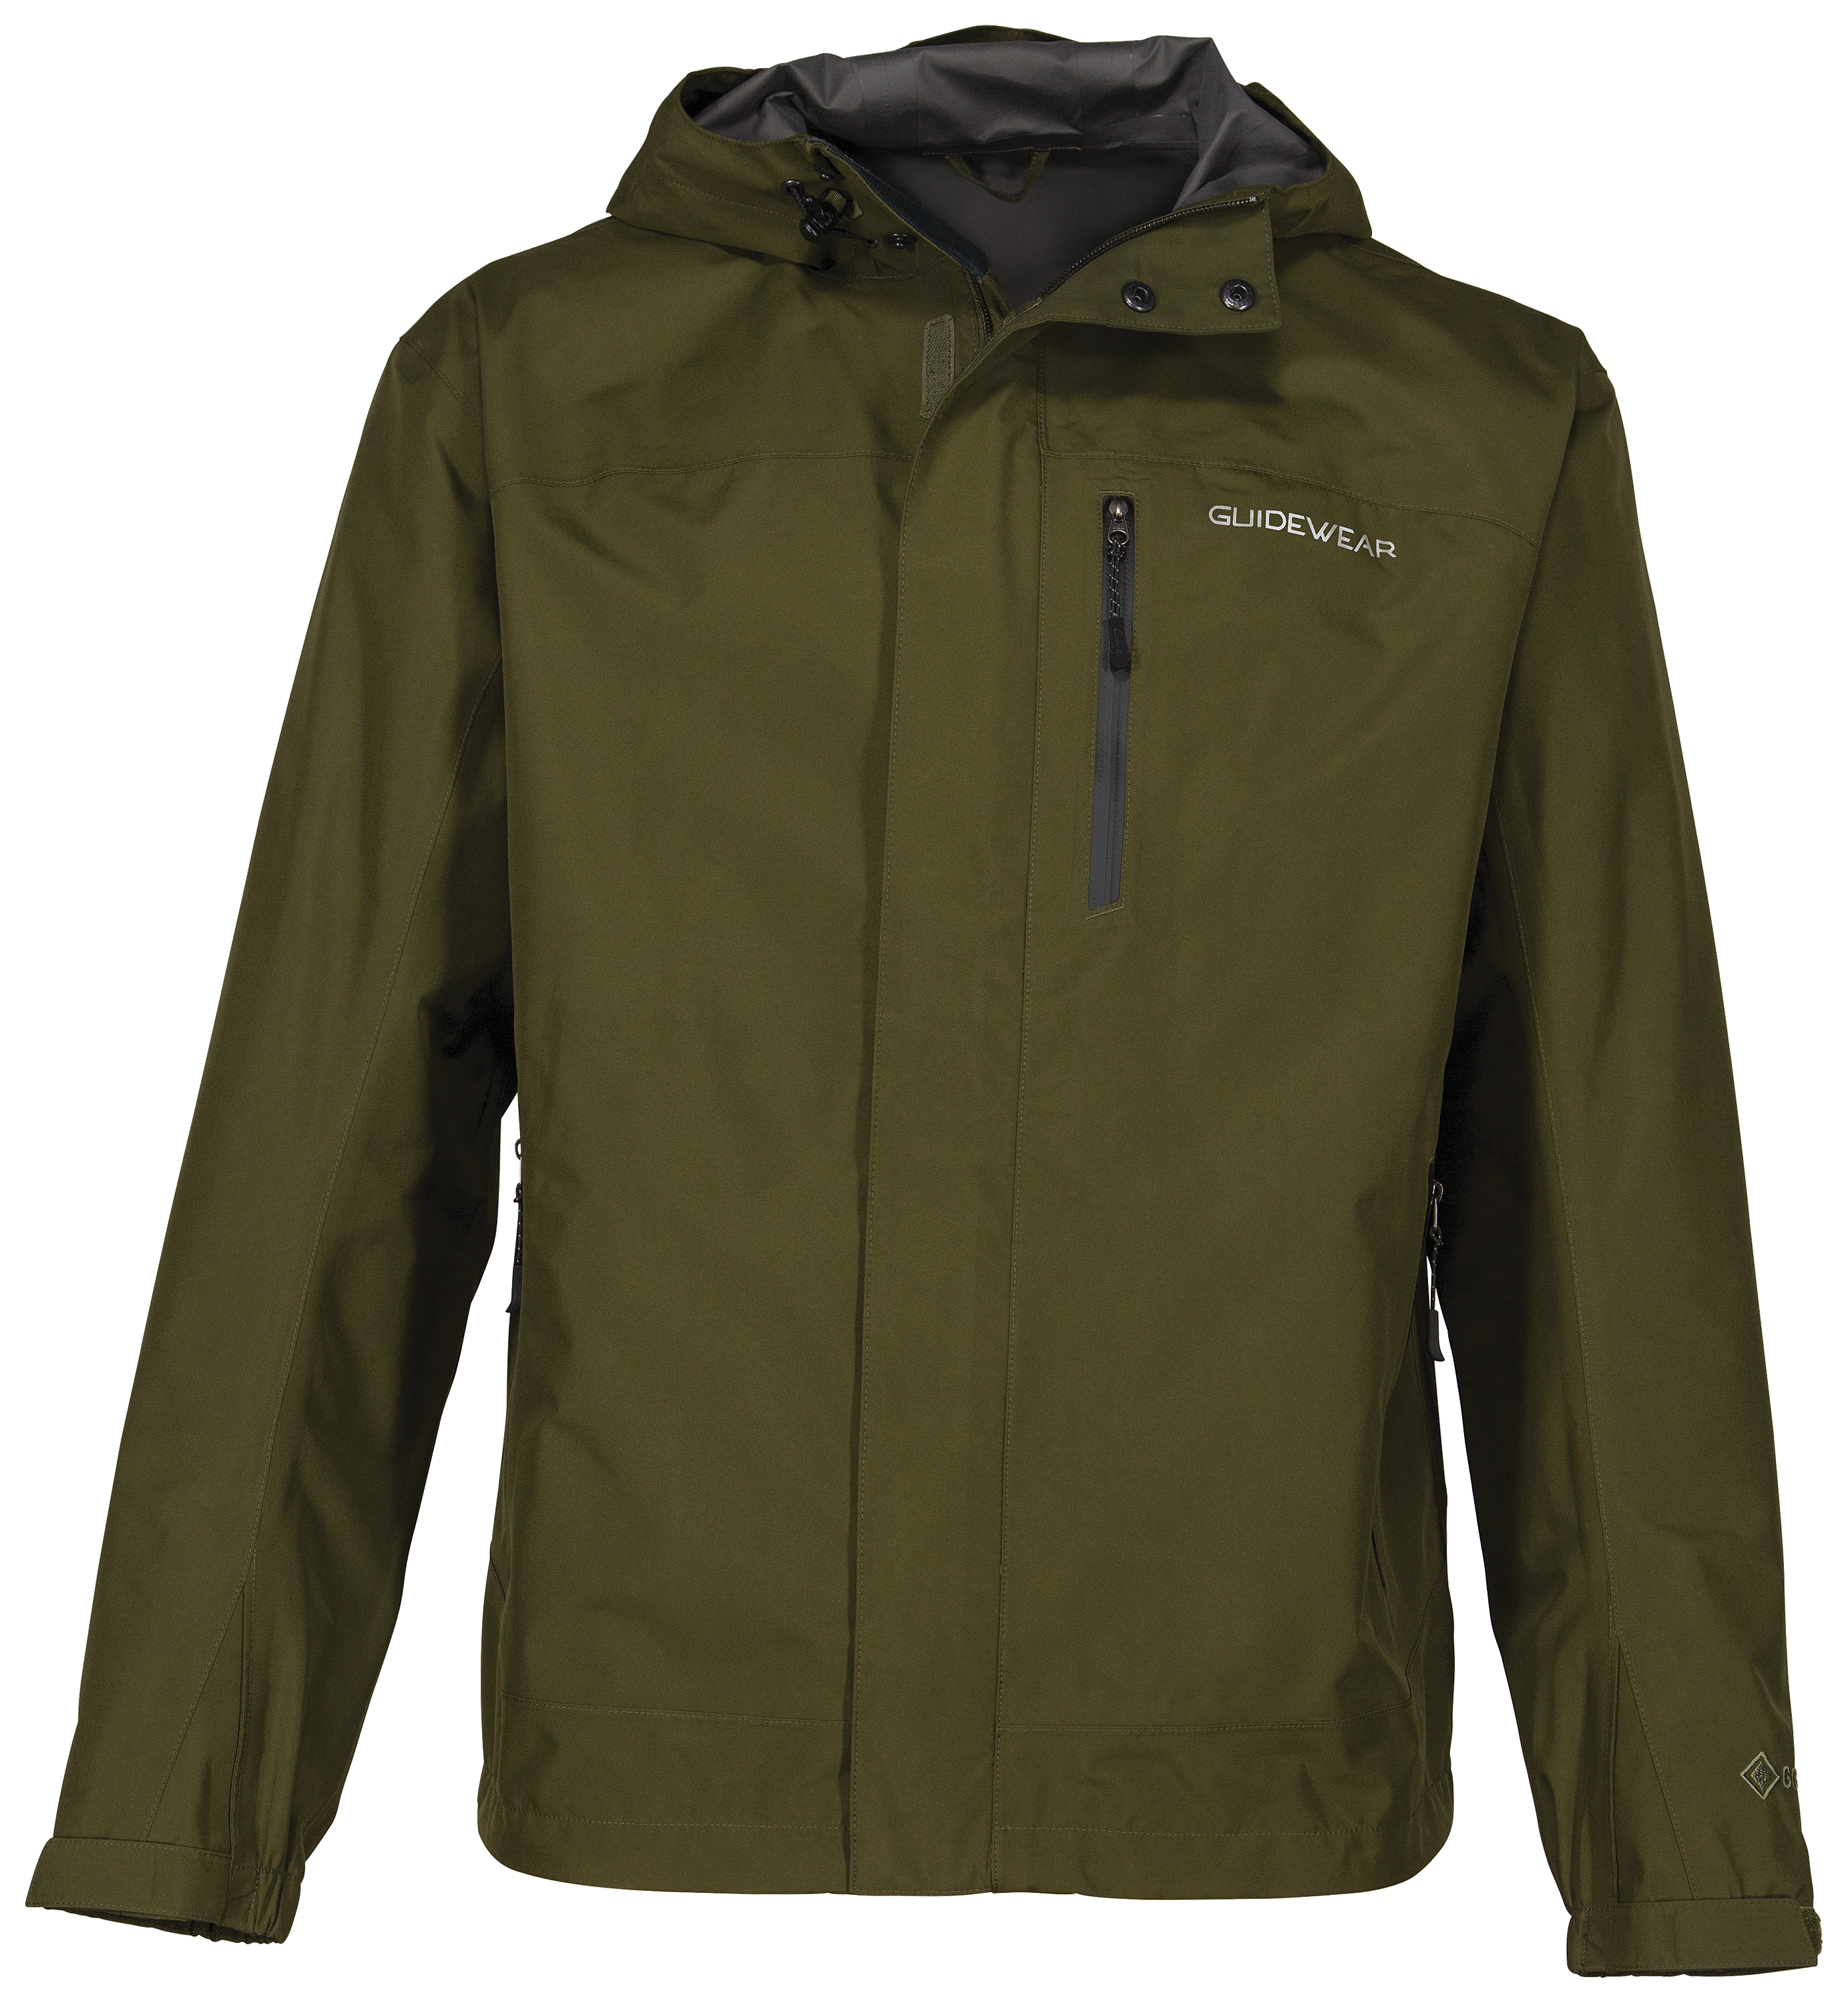 Johnny Morris Bass Pro Shops Guidewear Rainy River Jacket with GORE-TEX PacLite for Men